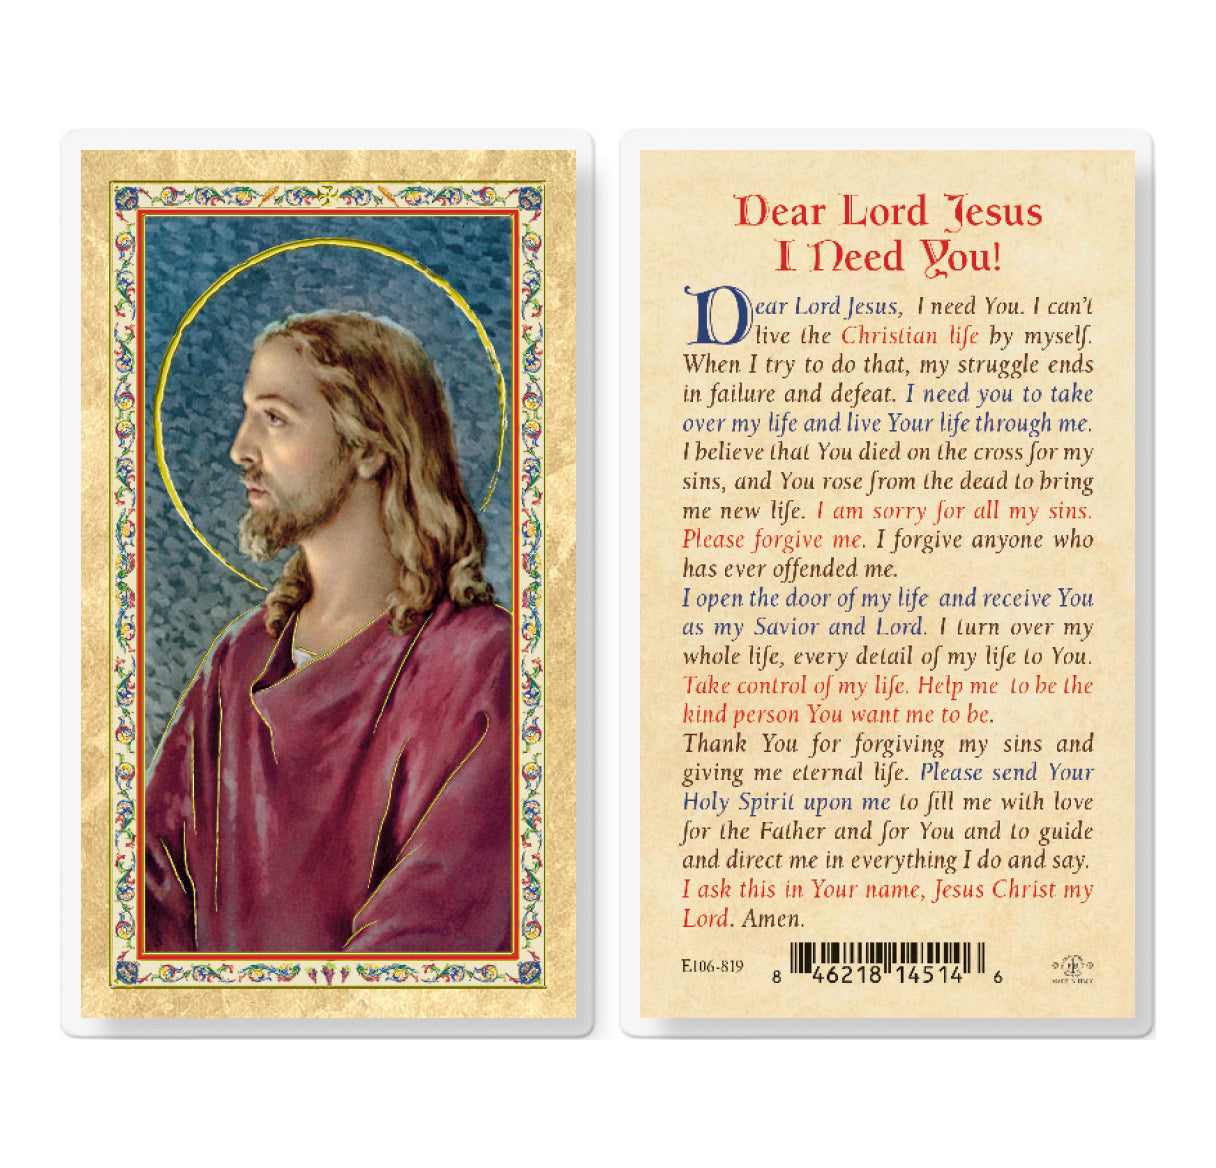 Dear Lord Jesus I Need You Gold-Stamped Laminated Catholic Prayer Holy Card with Prayer on Back, Pack of 25